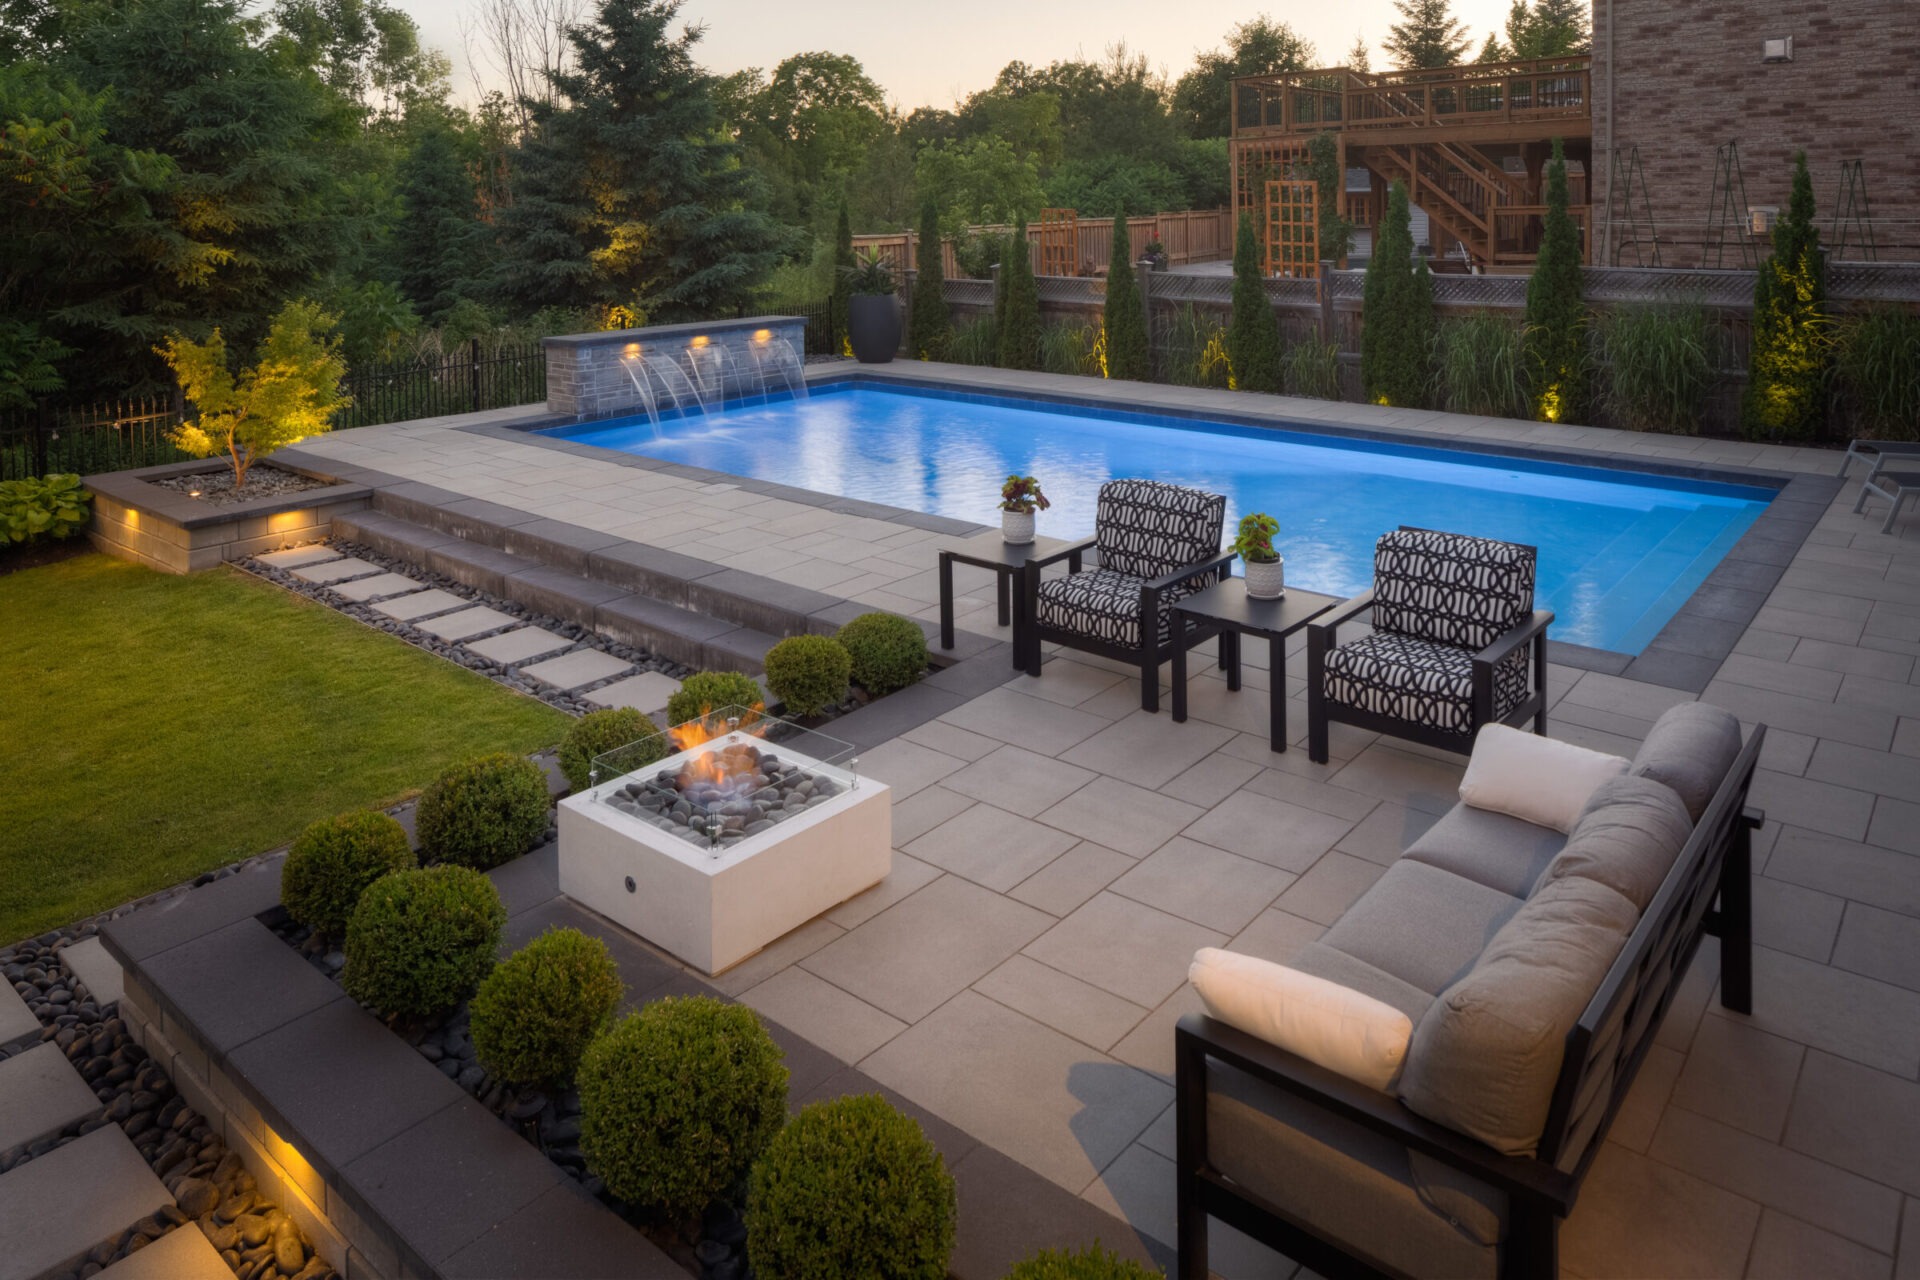 An elegant backyard at dusk featuring a lit swimming pool, patio with outdoor furniture, fire feature, manicured lawn, and ambient garden lighting.